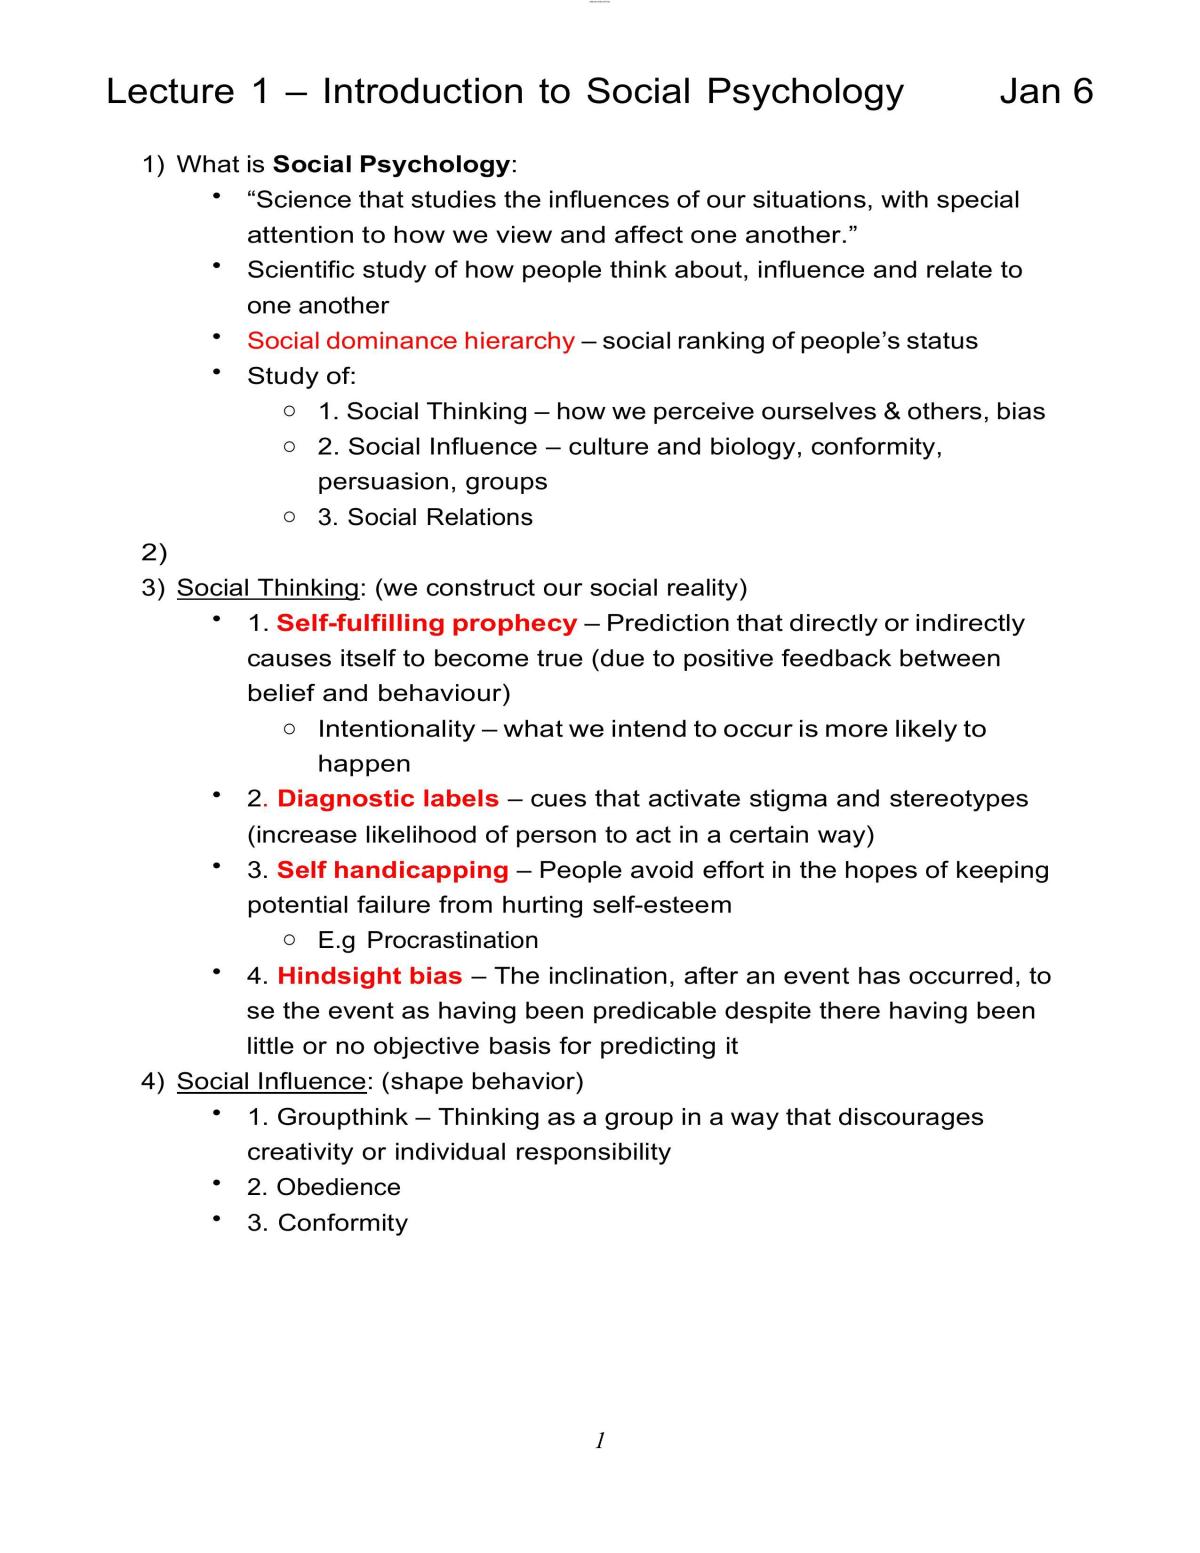 Introduction to Social Psychology Summary - Page 1